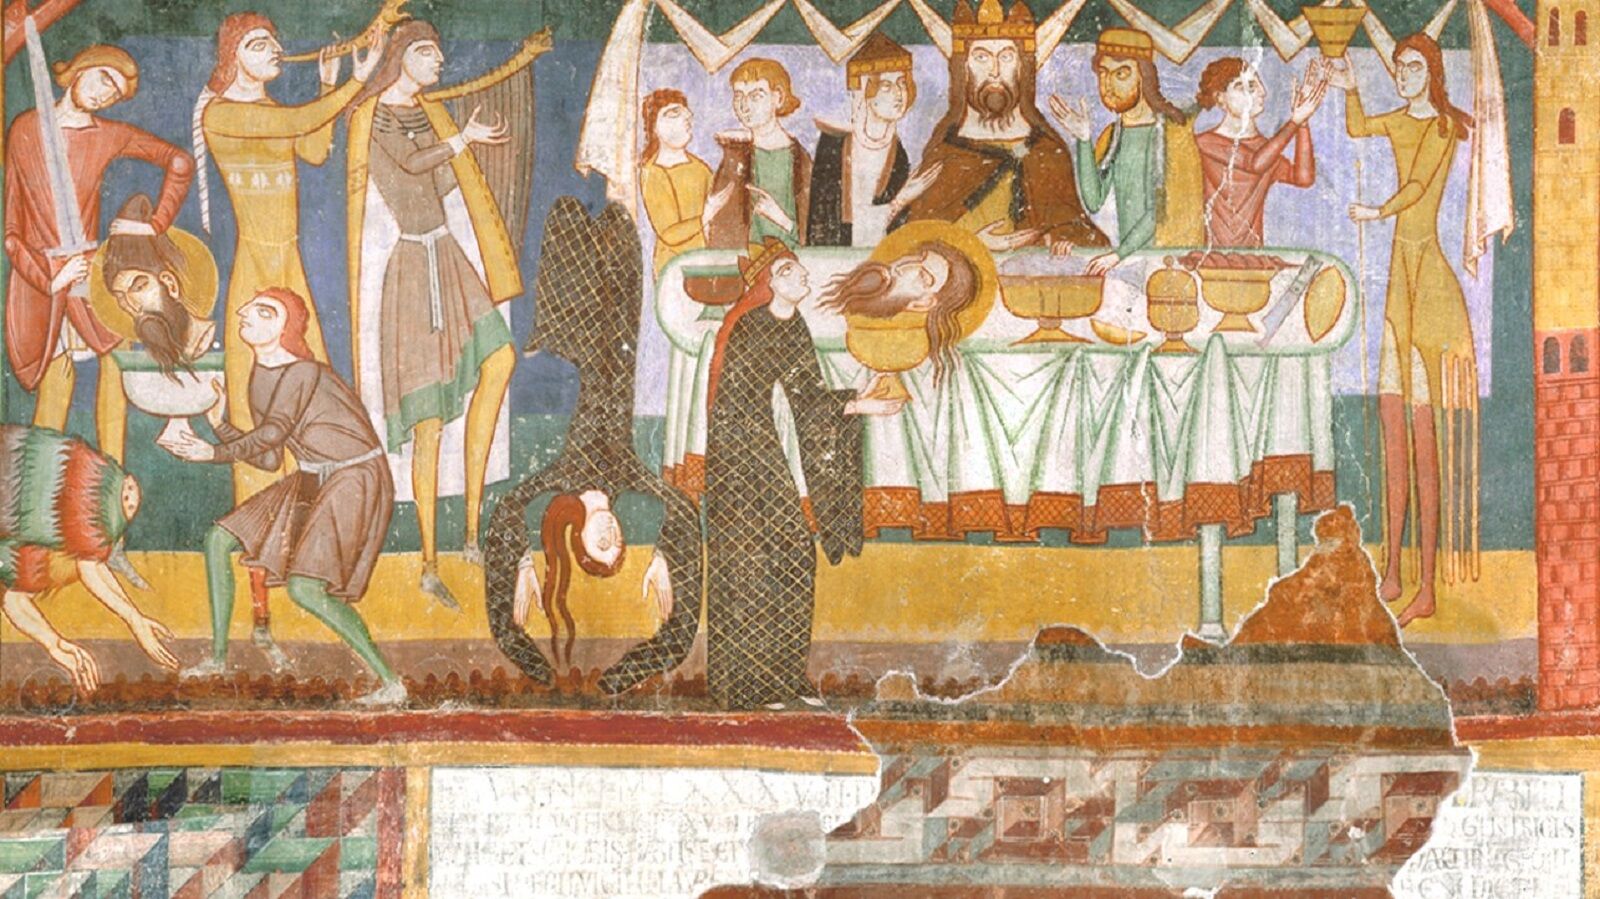 Herod's banquet: Romanesque mural in the monastery church of Müstair